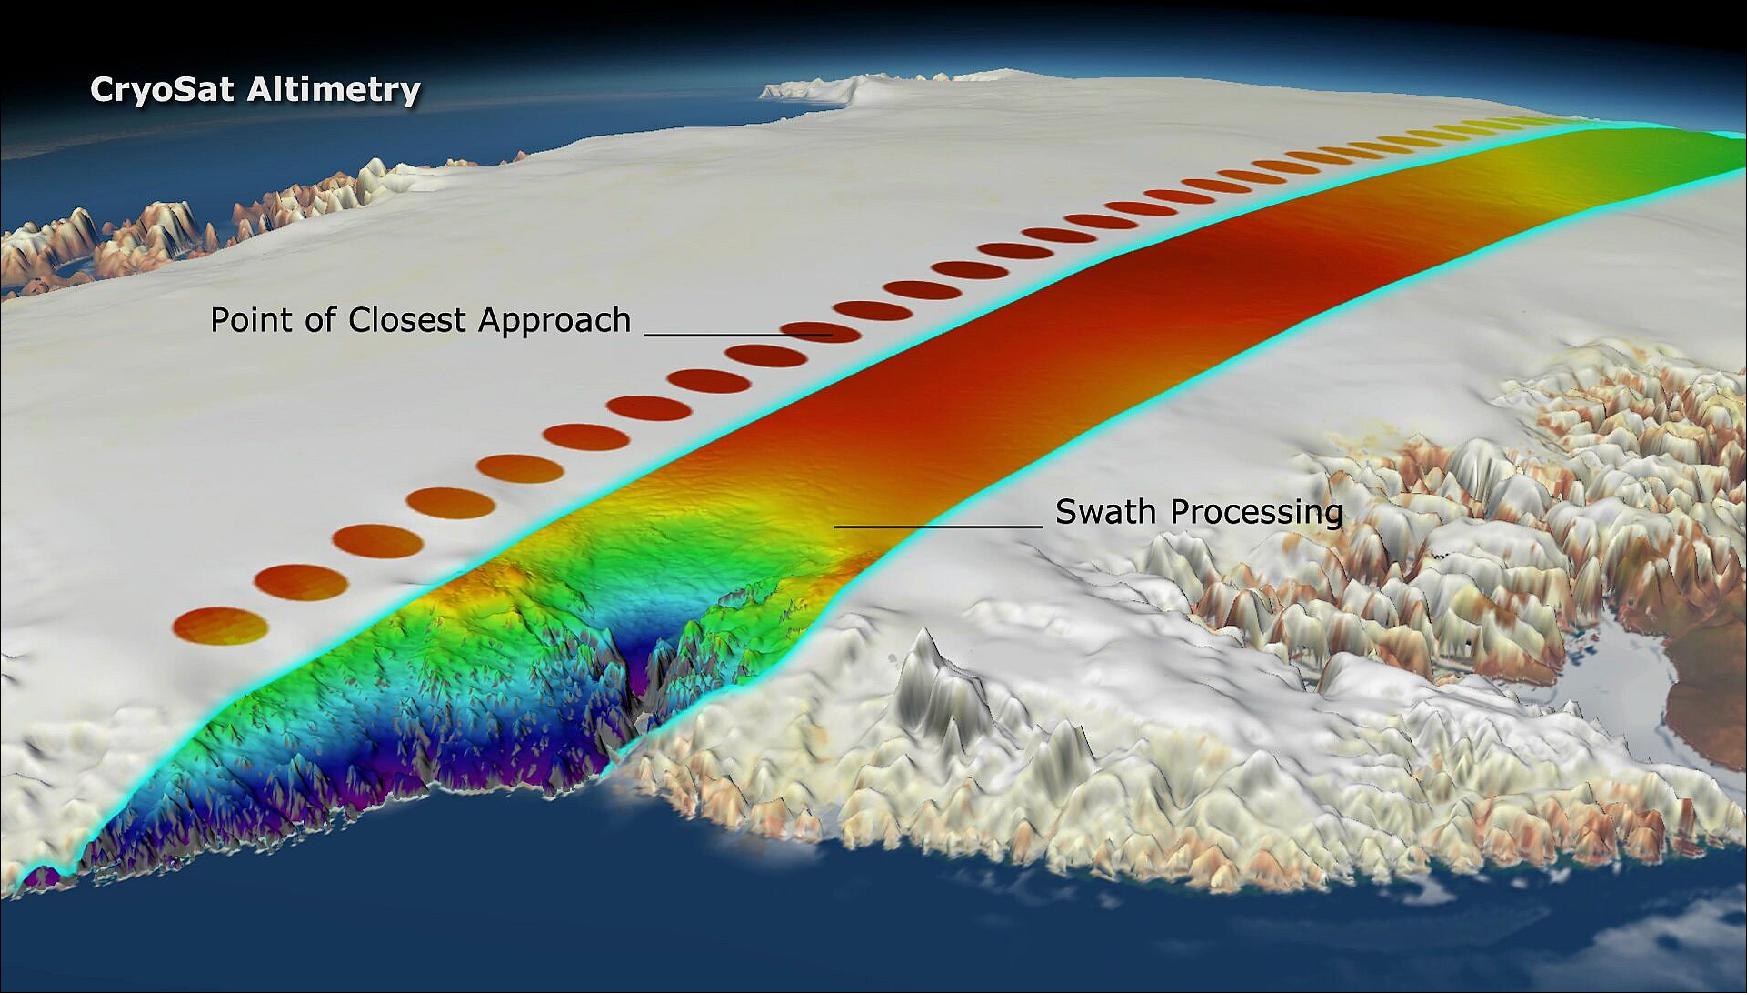 Figure 15: The technique of swath processing differs from conventional radar altimetry. Using CryoSat's novel interferometric mode, whole swaths, rather than single points, of elevations can be computed. This is yielding more detail that ever before on how glacial ice is changing (image credit: ESA/Planetary Visions)